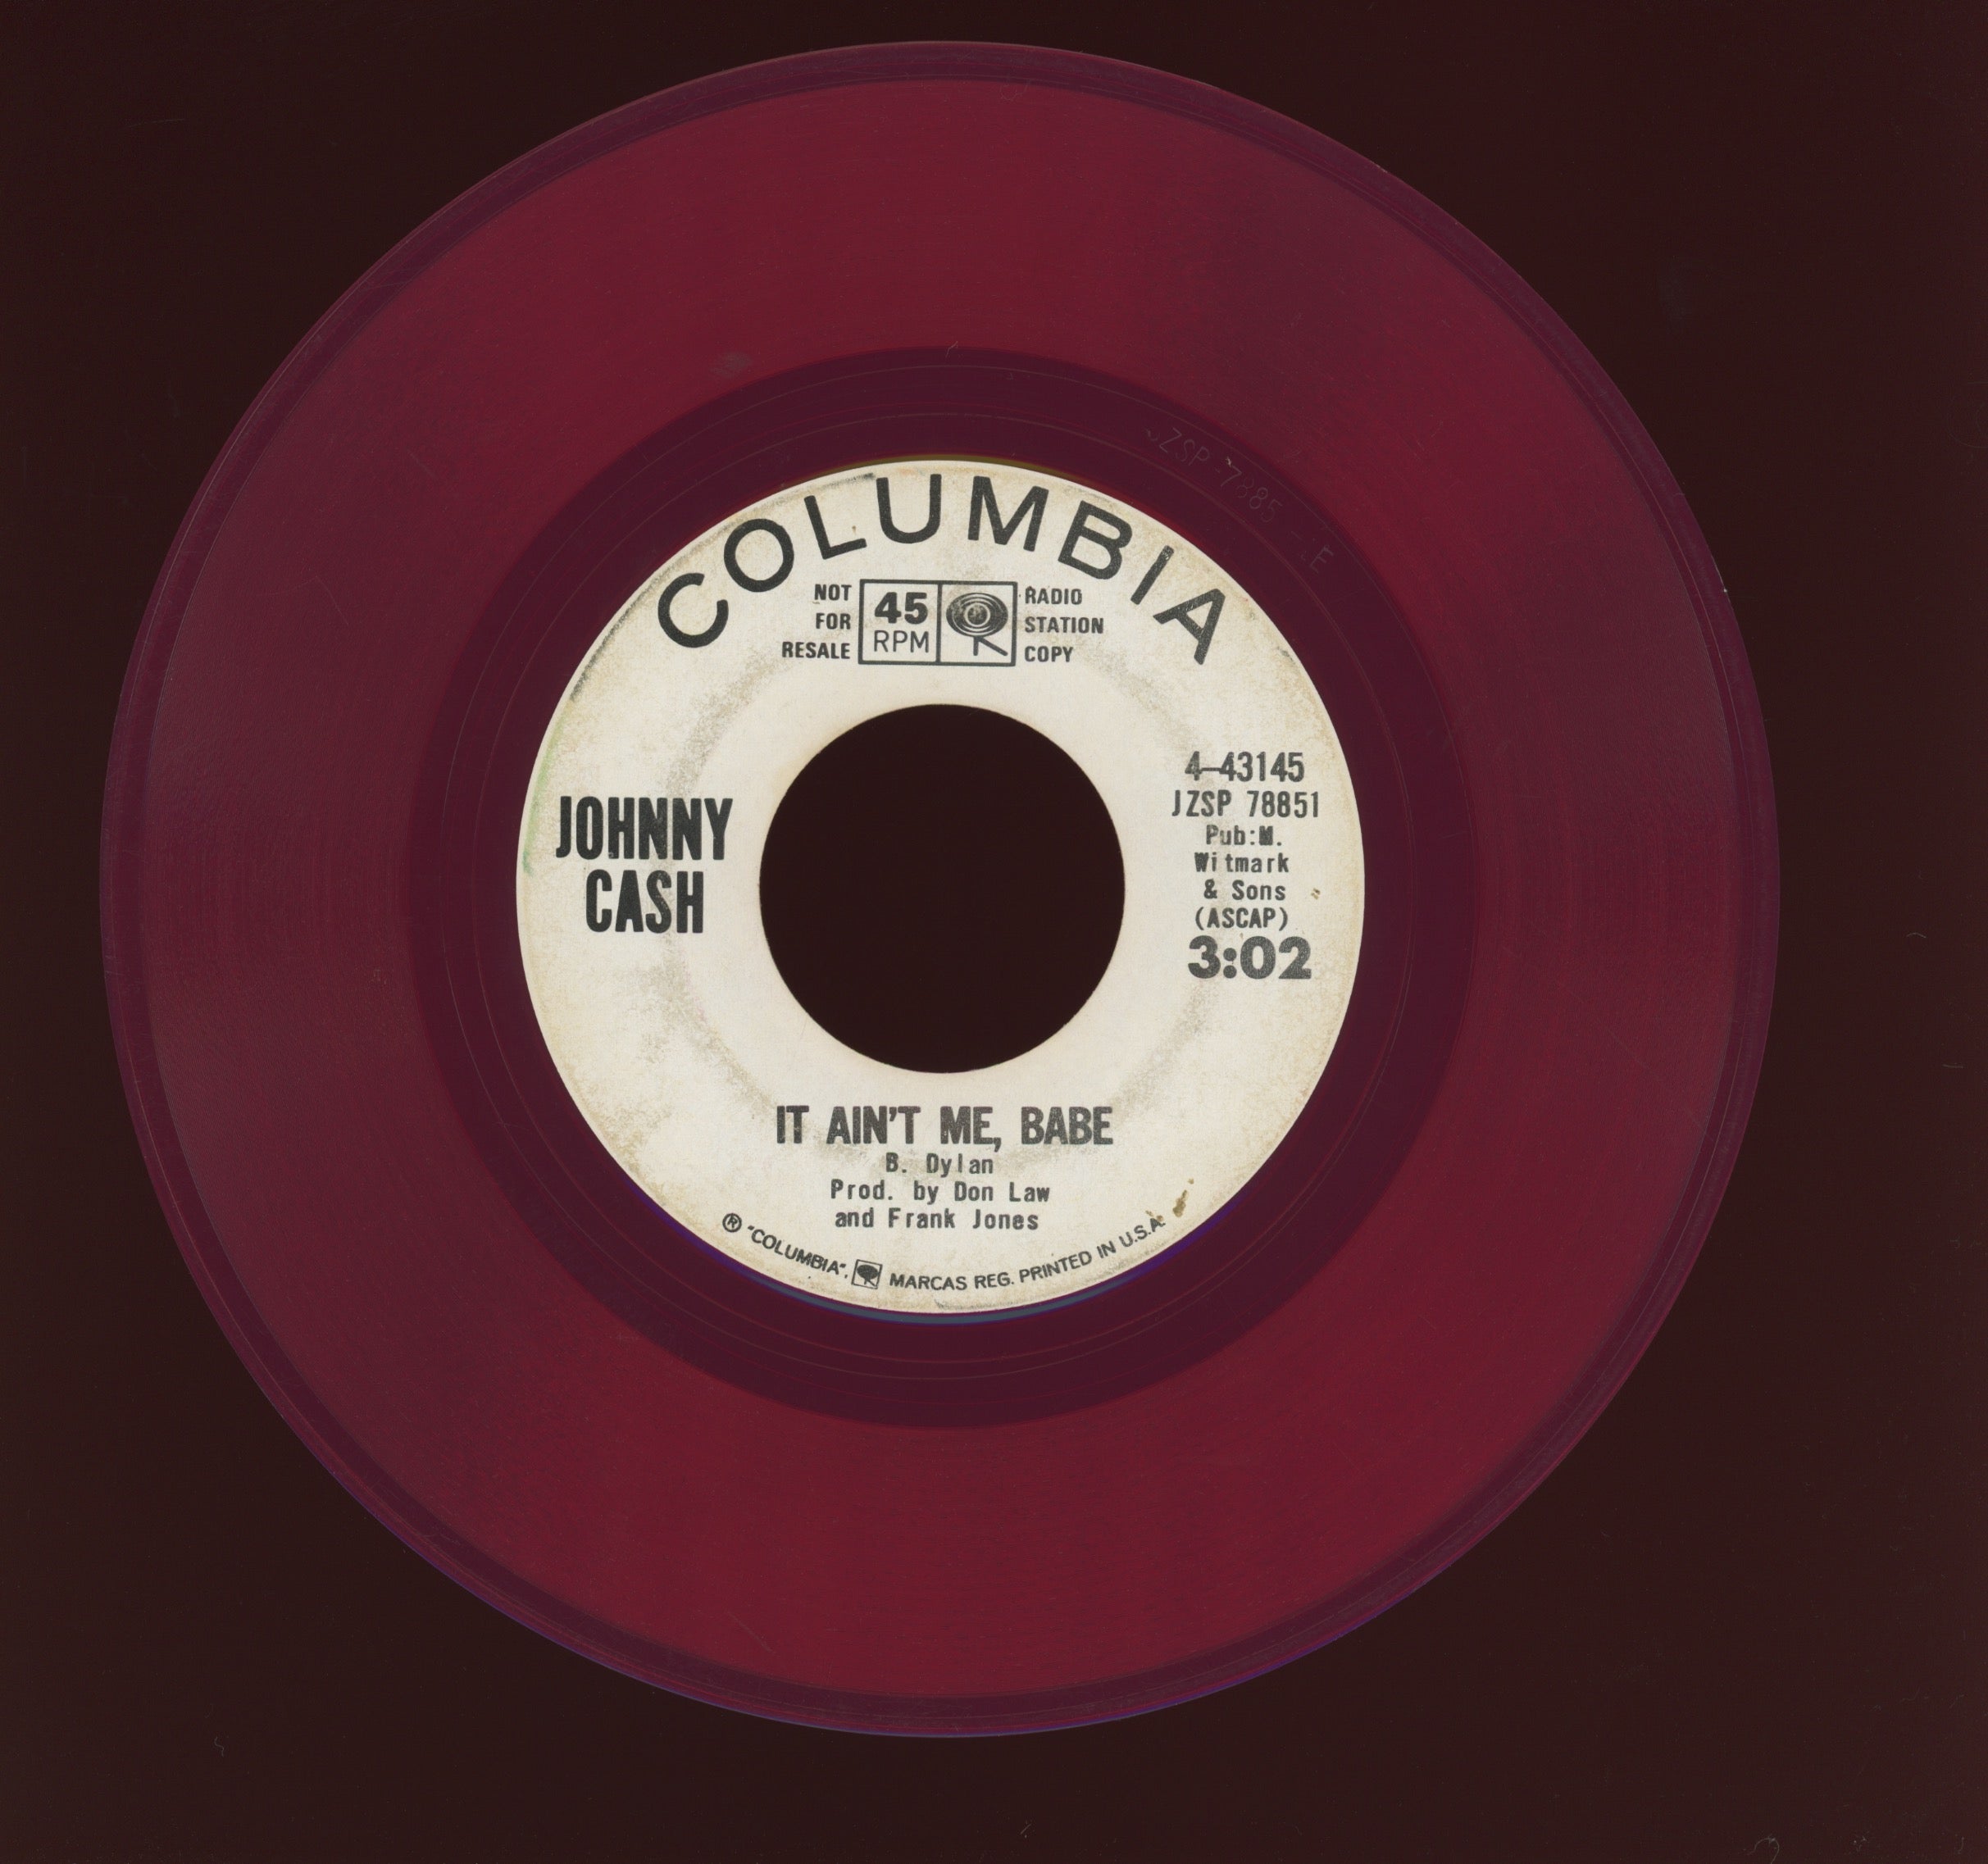 Johnny Cash - It Ain't Me, Babe on Columbia Red Vinyl Promo